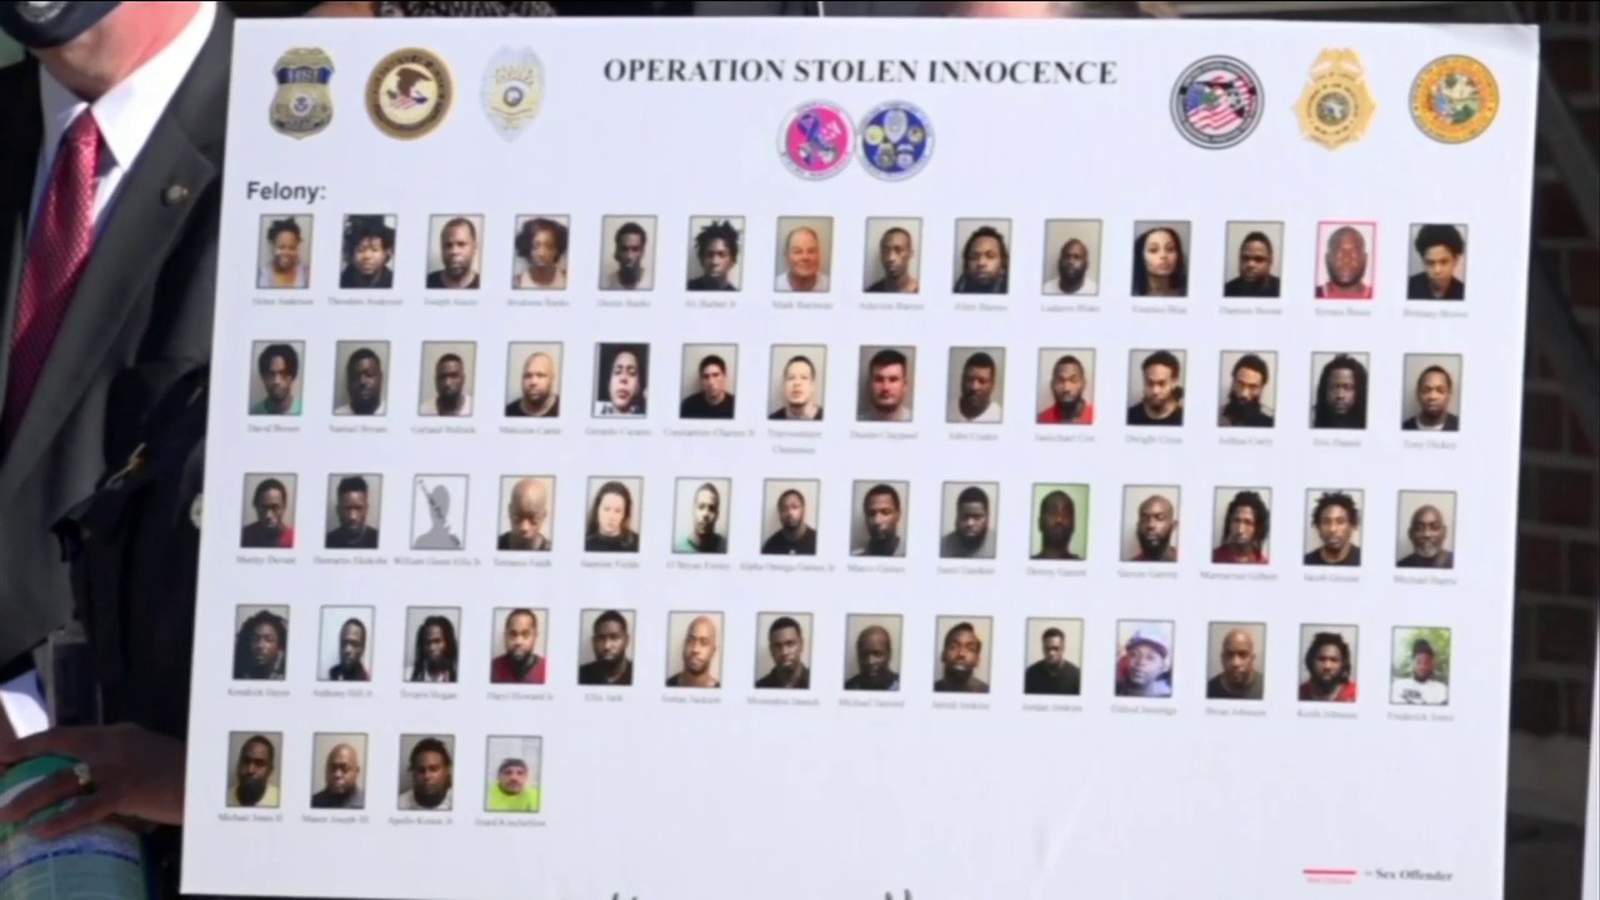 Nearly 200 arrested in Florida human trafficking investigation